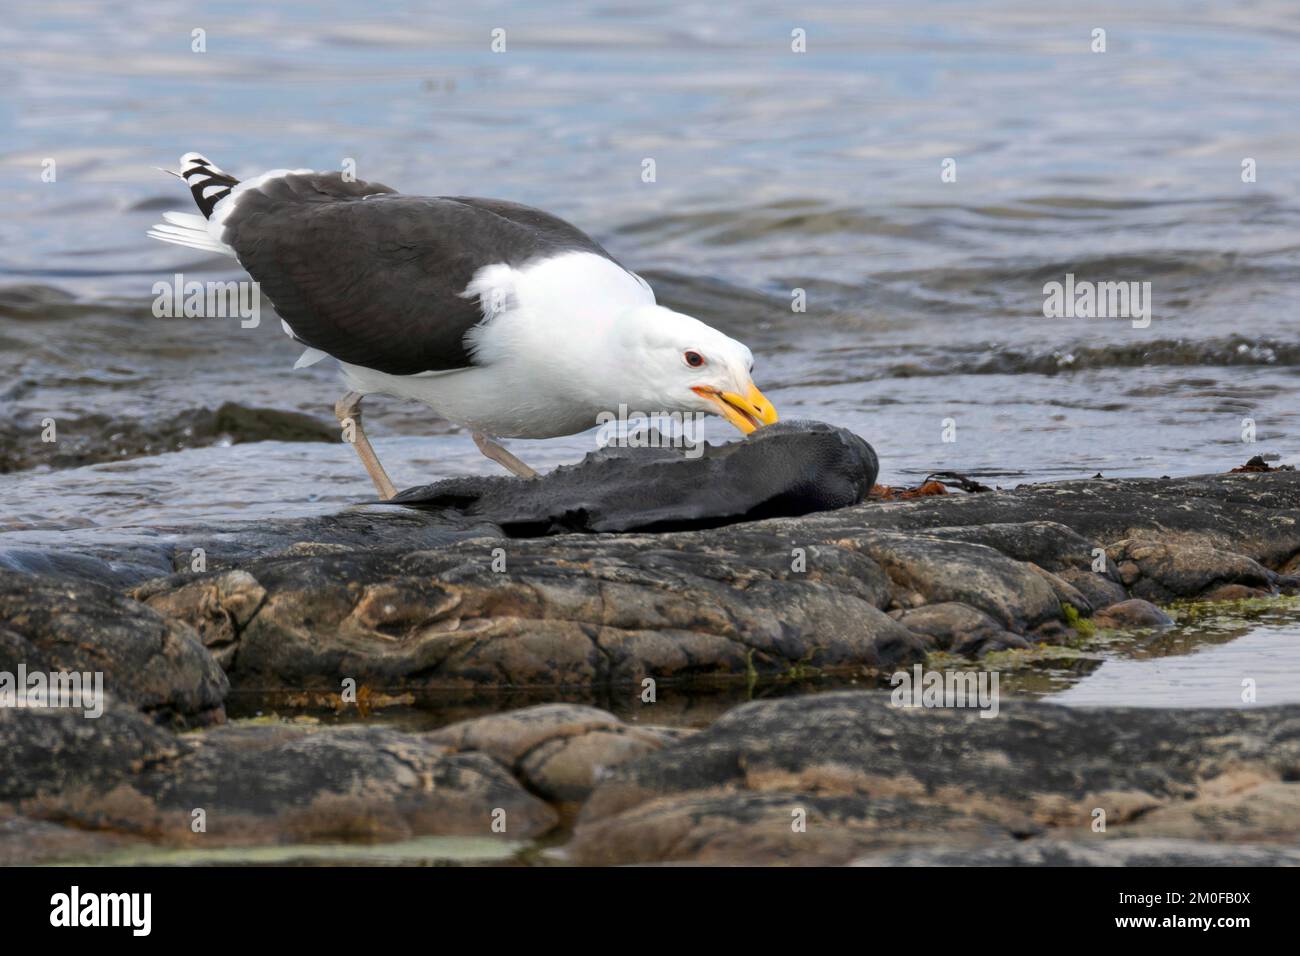 greater black-backed gull (Larus marinus), stands on the waterside in breeding plumage and feeding a washed up lumpfish, side view, Sweden Stock Photo